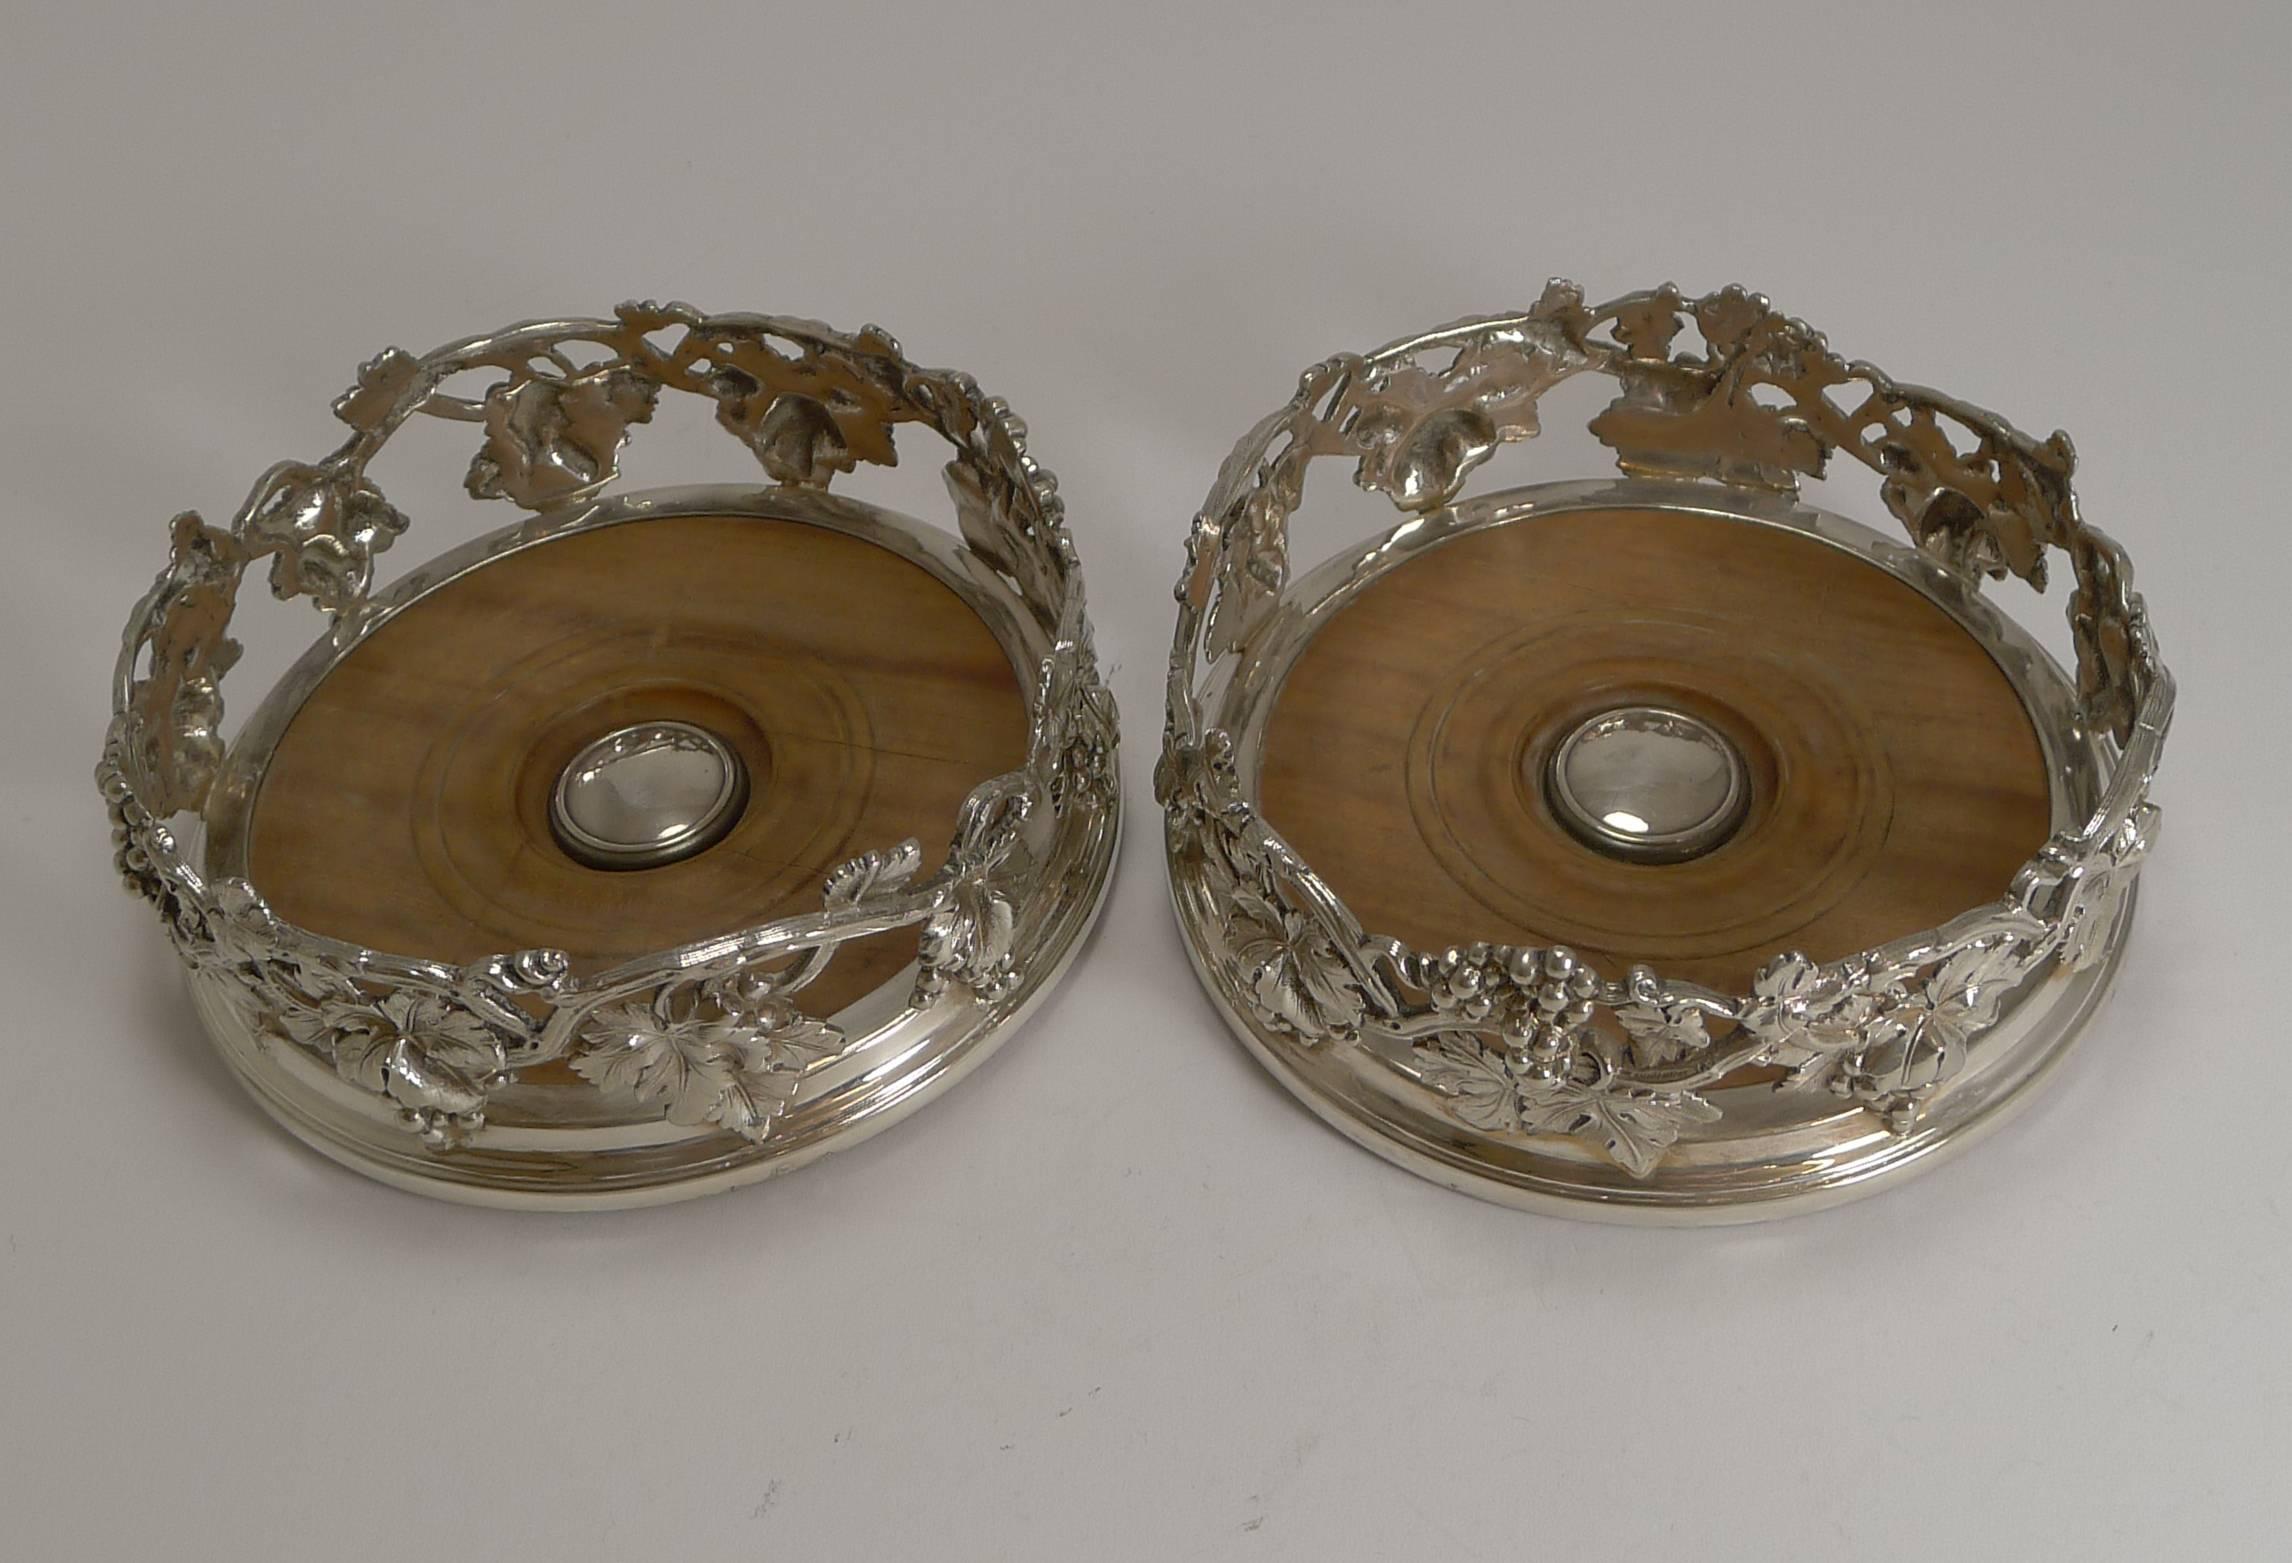 A magnificent set of early Victorian Elkington silver plate wine coasters, with an attractive cast grape vine design with lovely detail. The coasters have turned wooden bases, with a central silver plate boss without engraving.

Both coasters